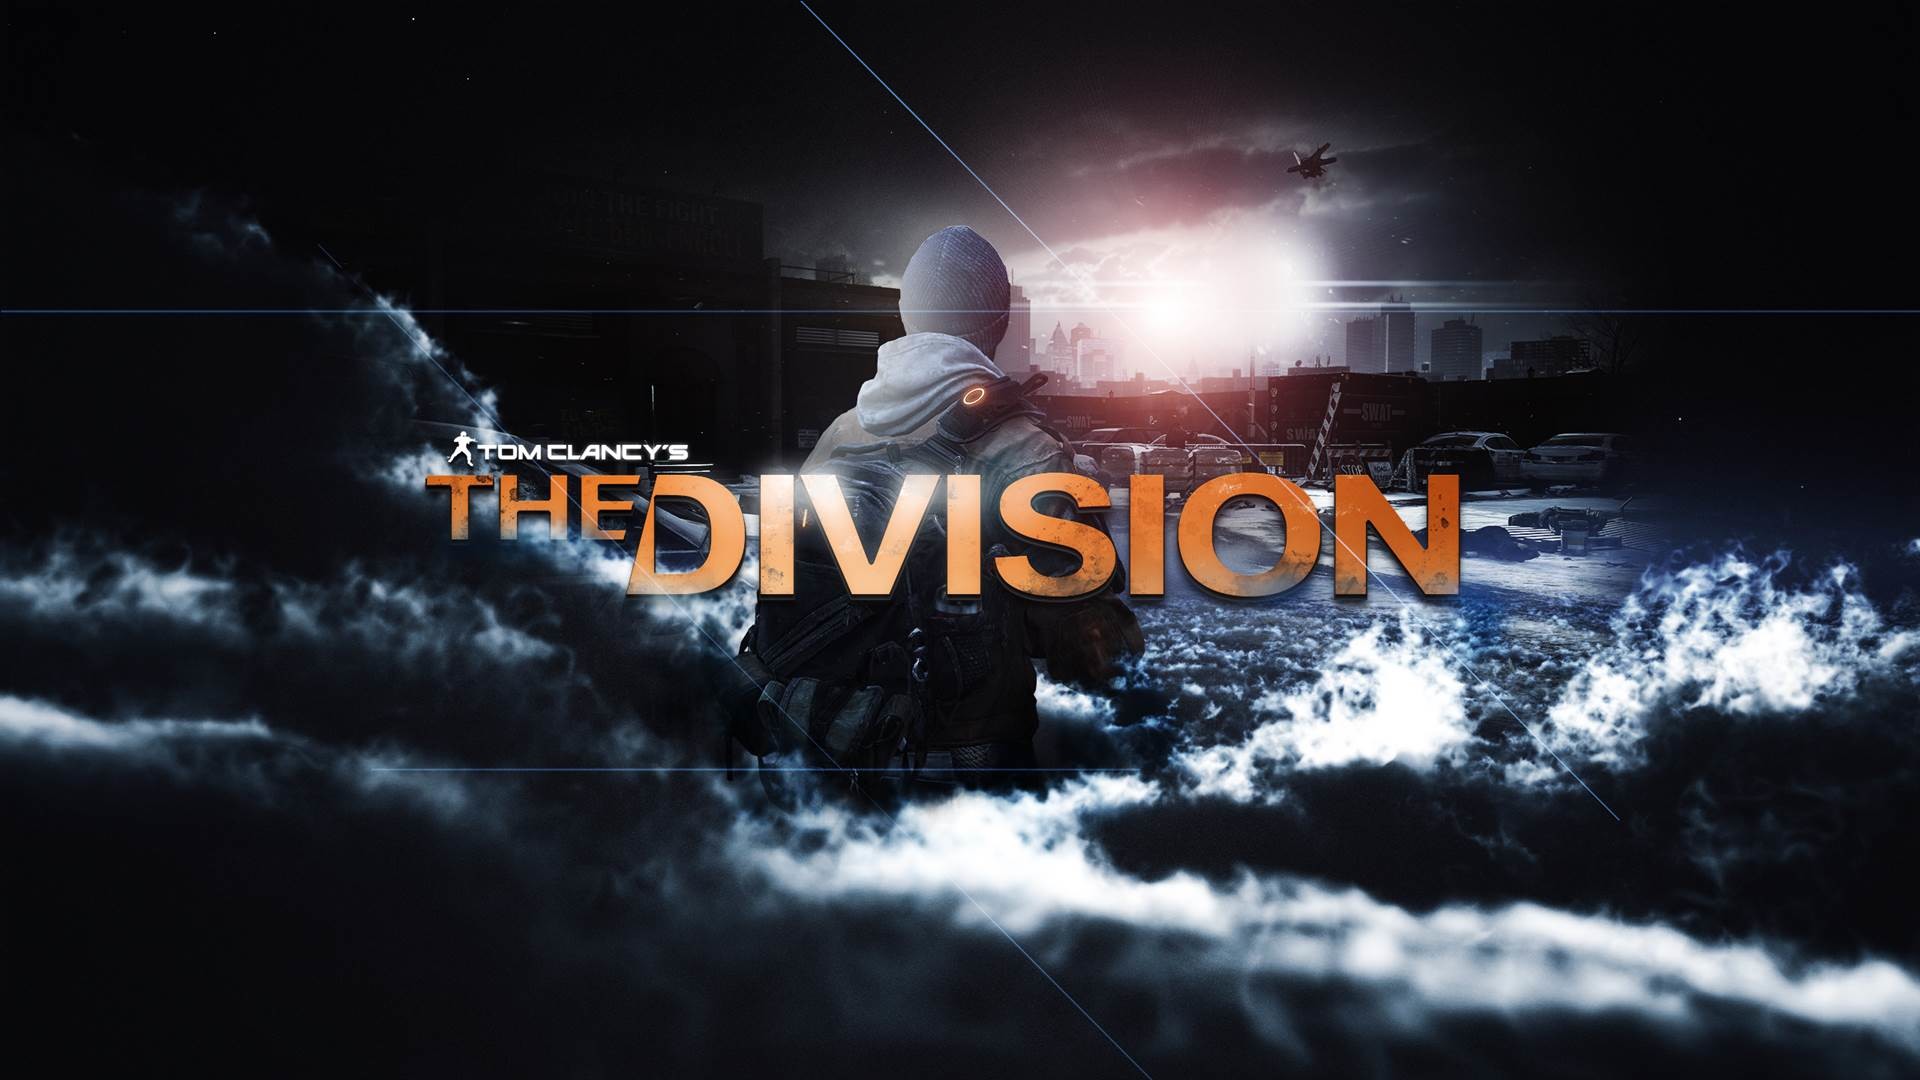 1920x1080 Tom Clancy's The Division Game Wallpaper